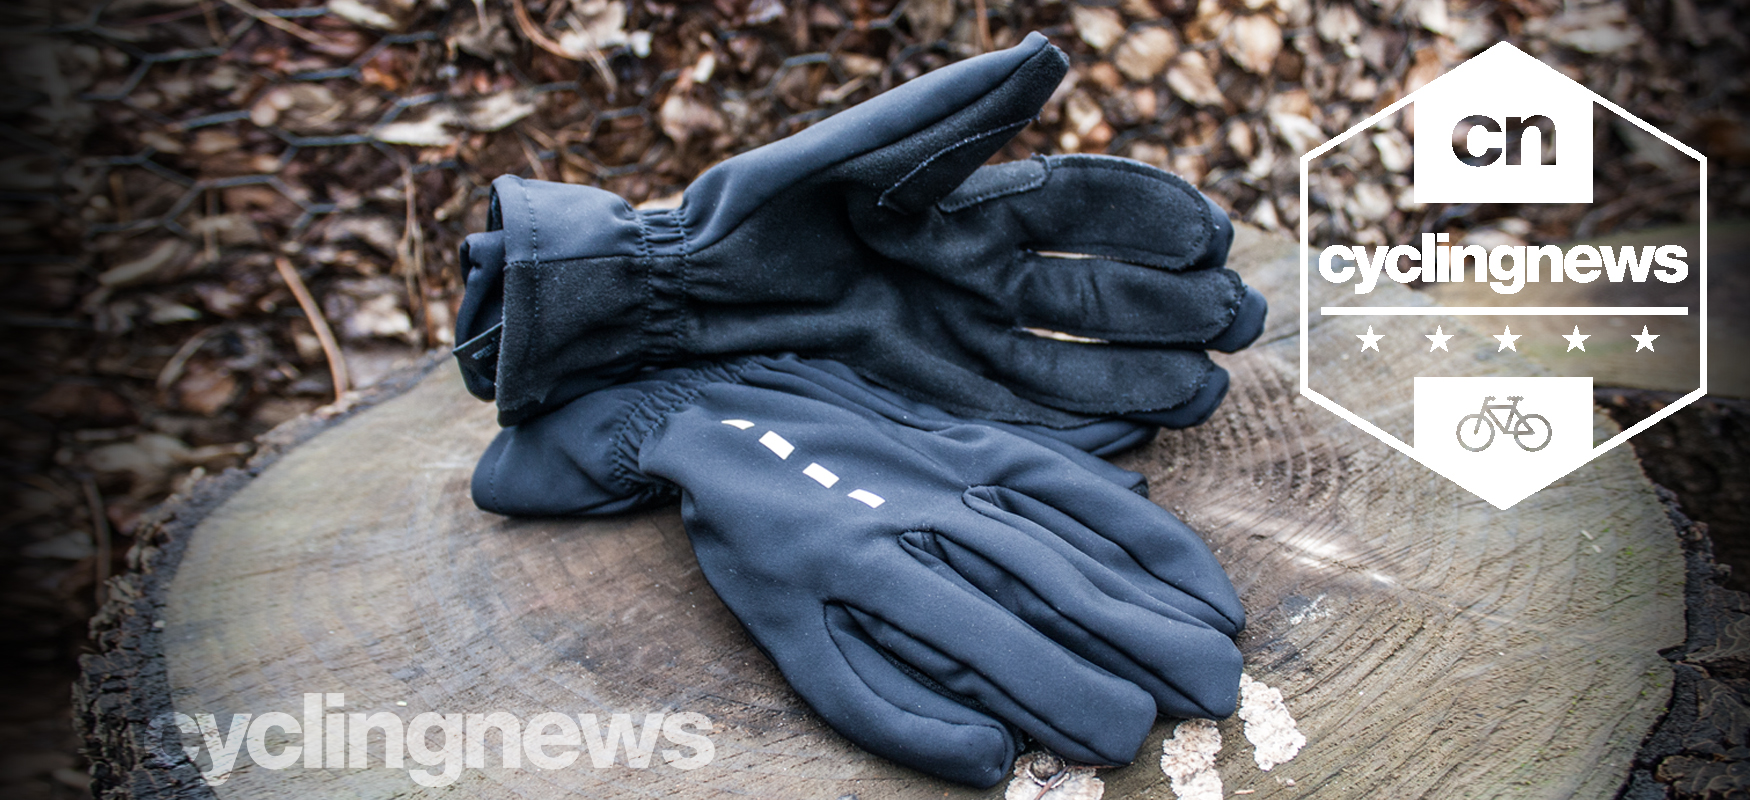 La Passione Deep Winter Gloves review | Cyclingnews